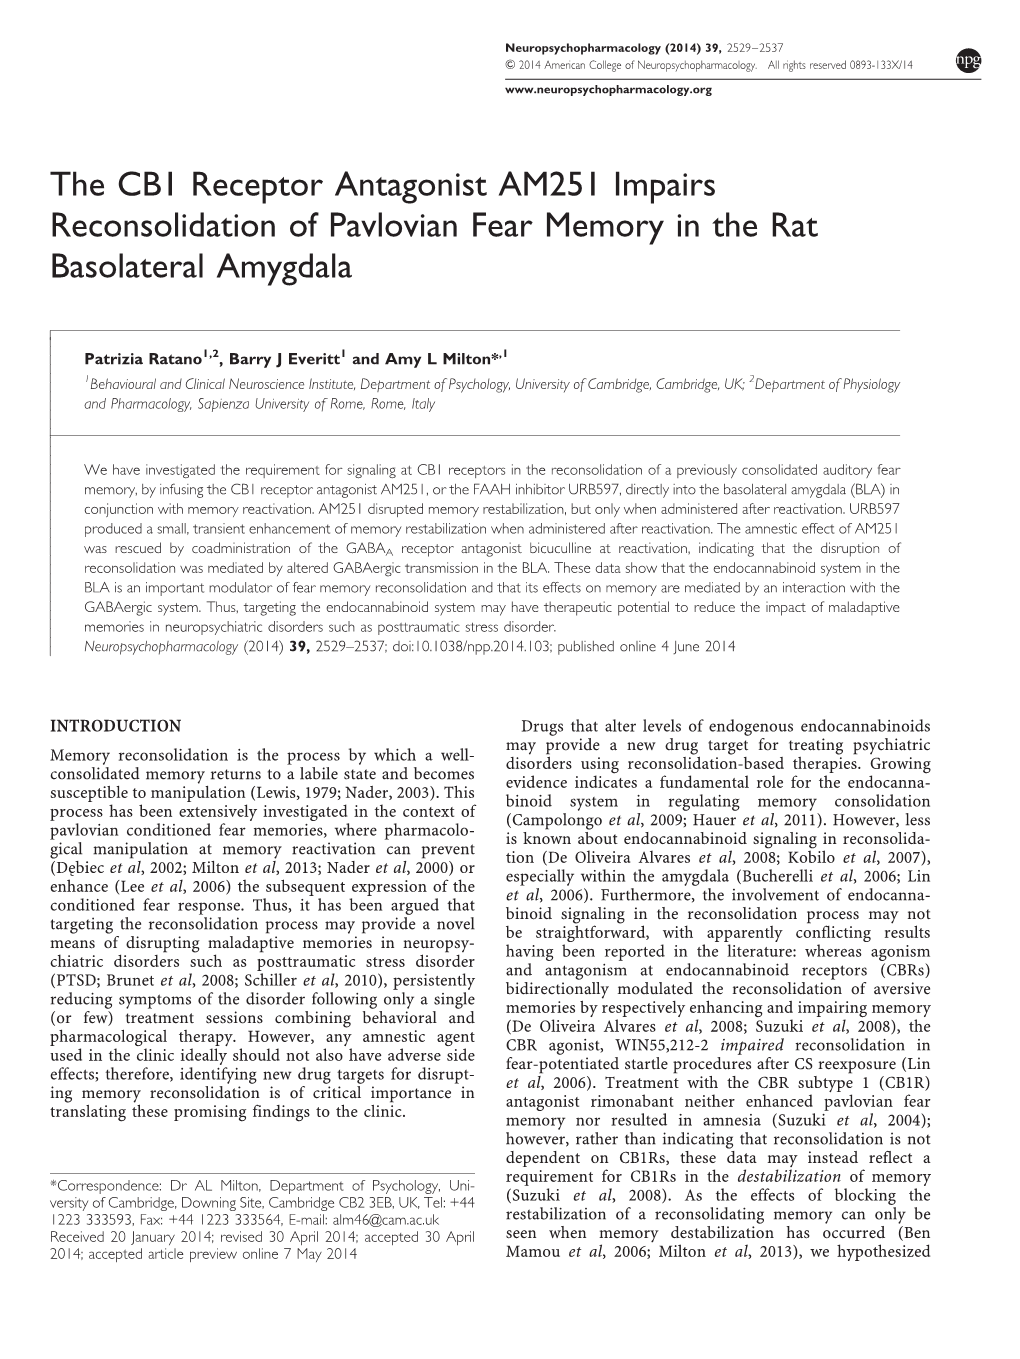 The CB1 Receptor Antagonist AM251 Impairs Reconsolidation of Pavlovian Fear Memory in the Rat Basolateral Amygdala